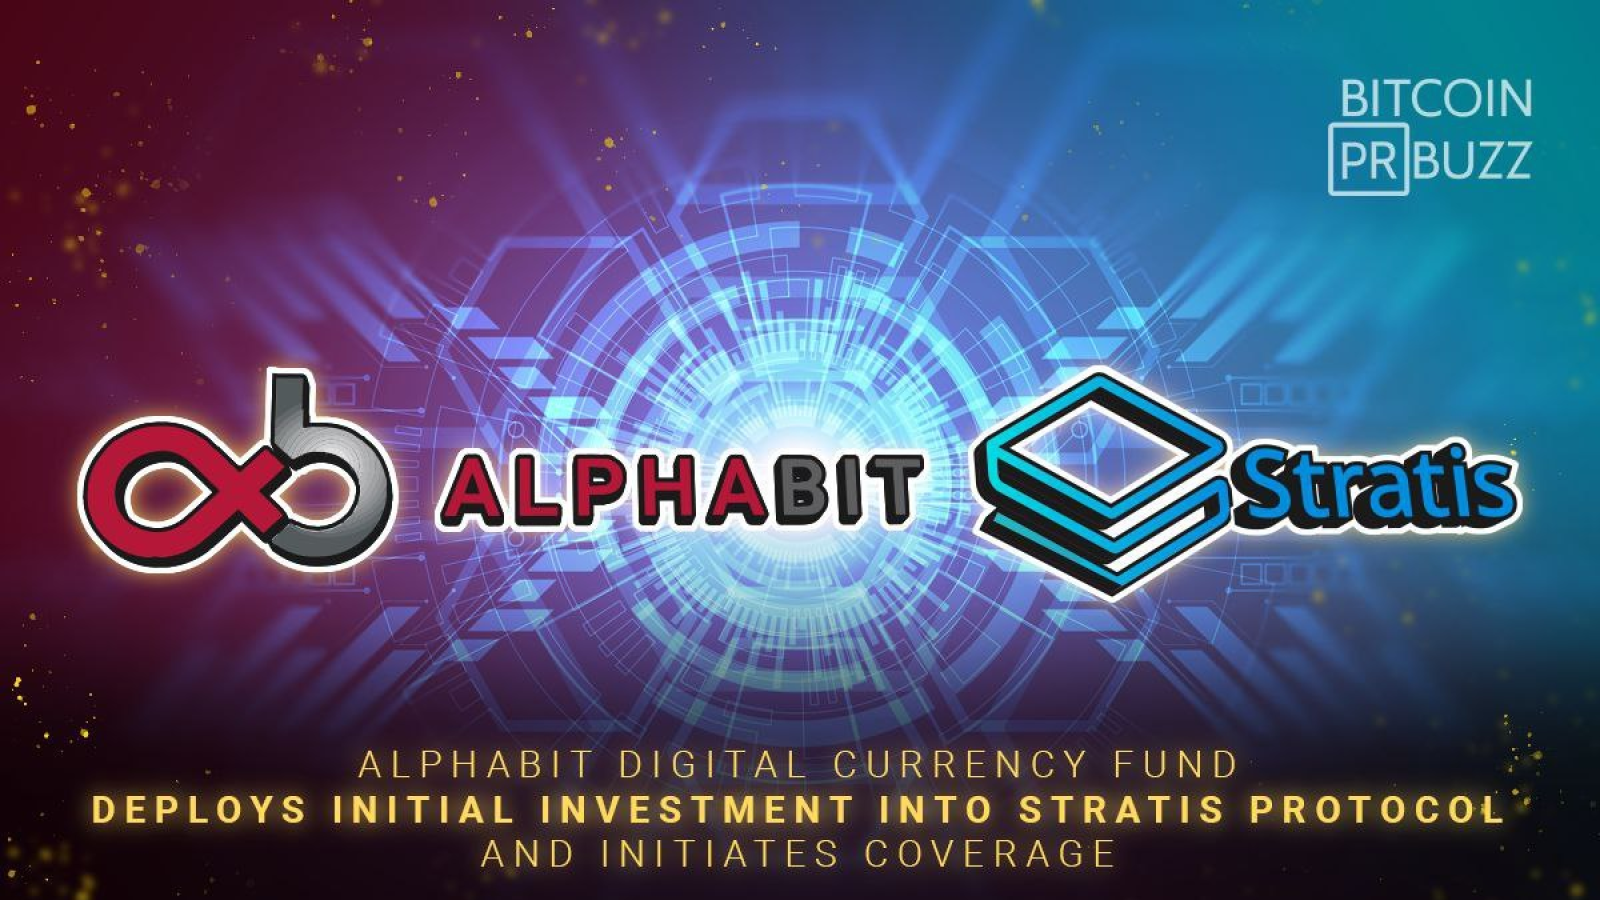 Alphabit Digital Currency Fund Deploys Initial Investment Into Stratis Protocol and Initiates Coverage